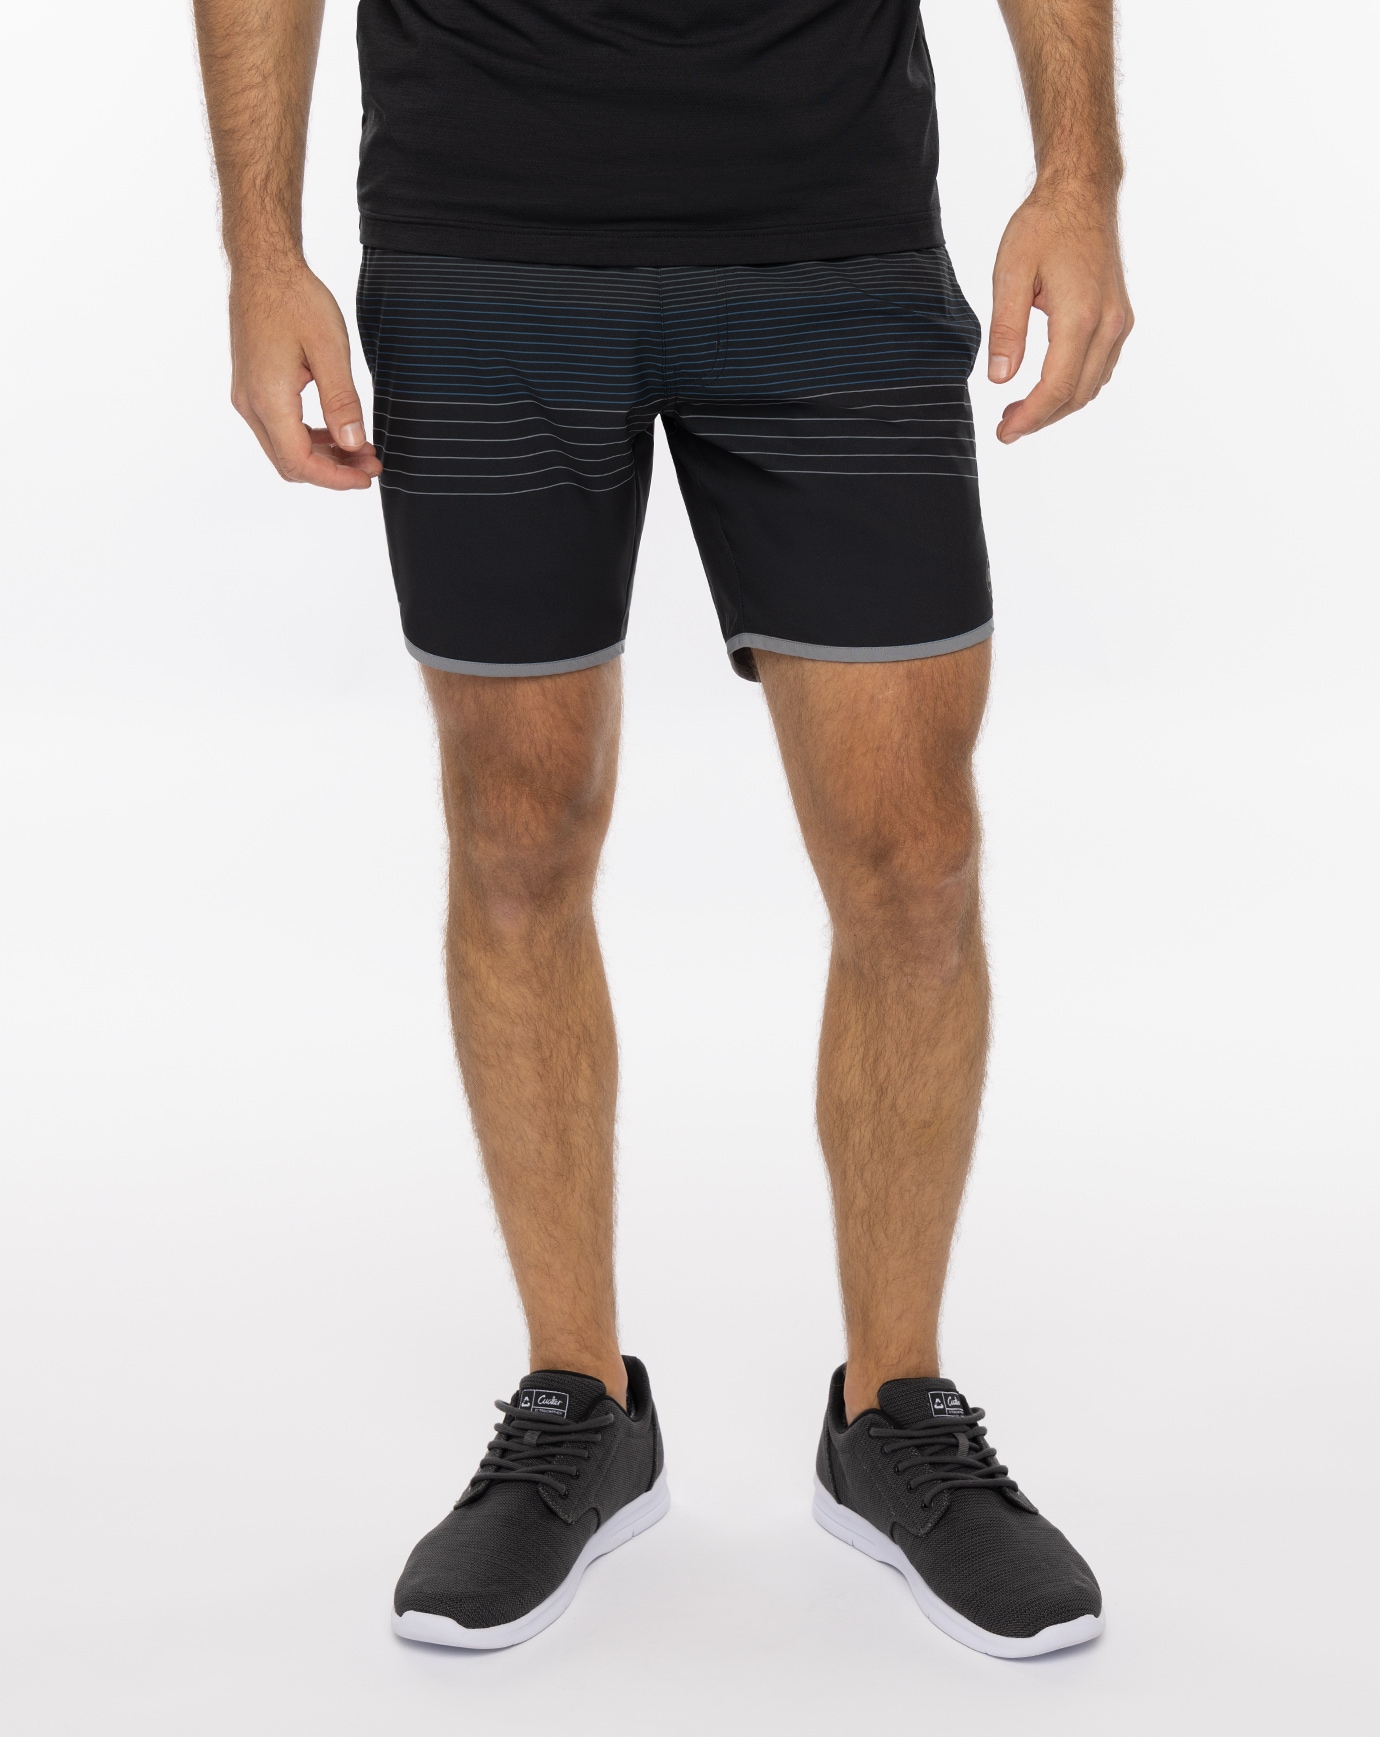 Related Product - GO TIME 3.0 ACTIVE SHORT